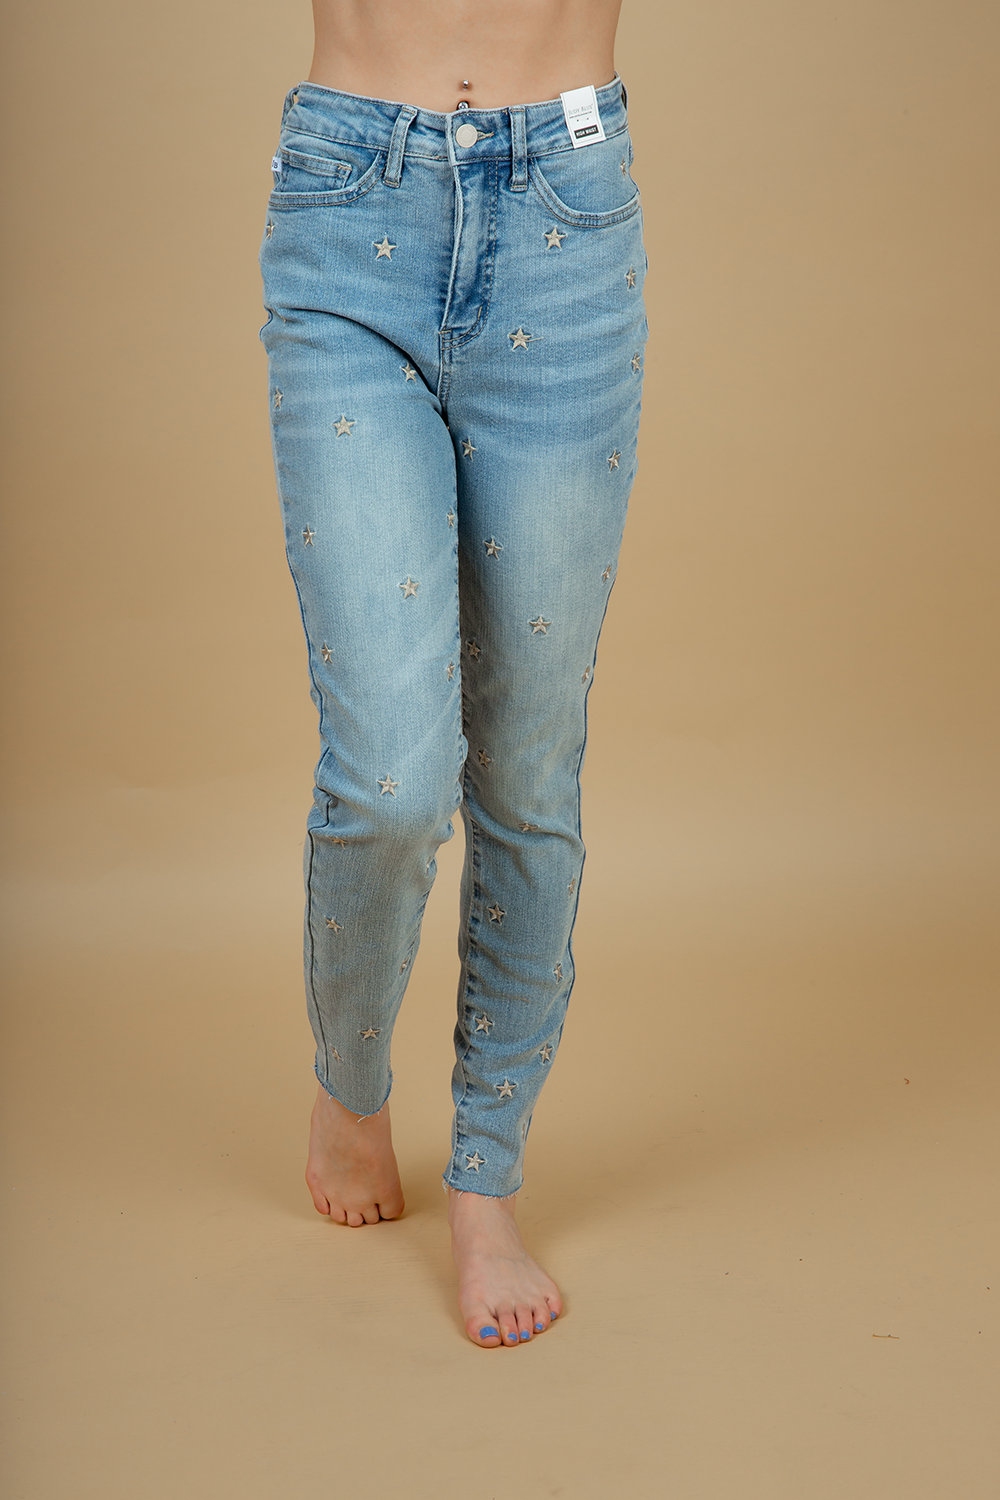 Judy Blue Shooting Stars Embroidered Light Wash Jeans